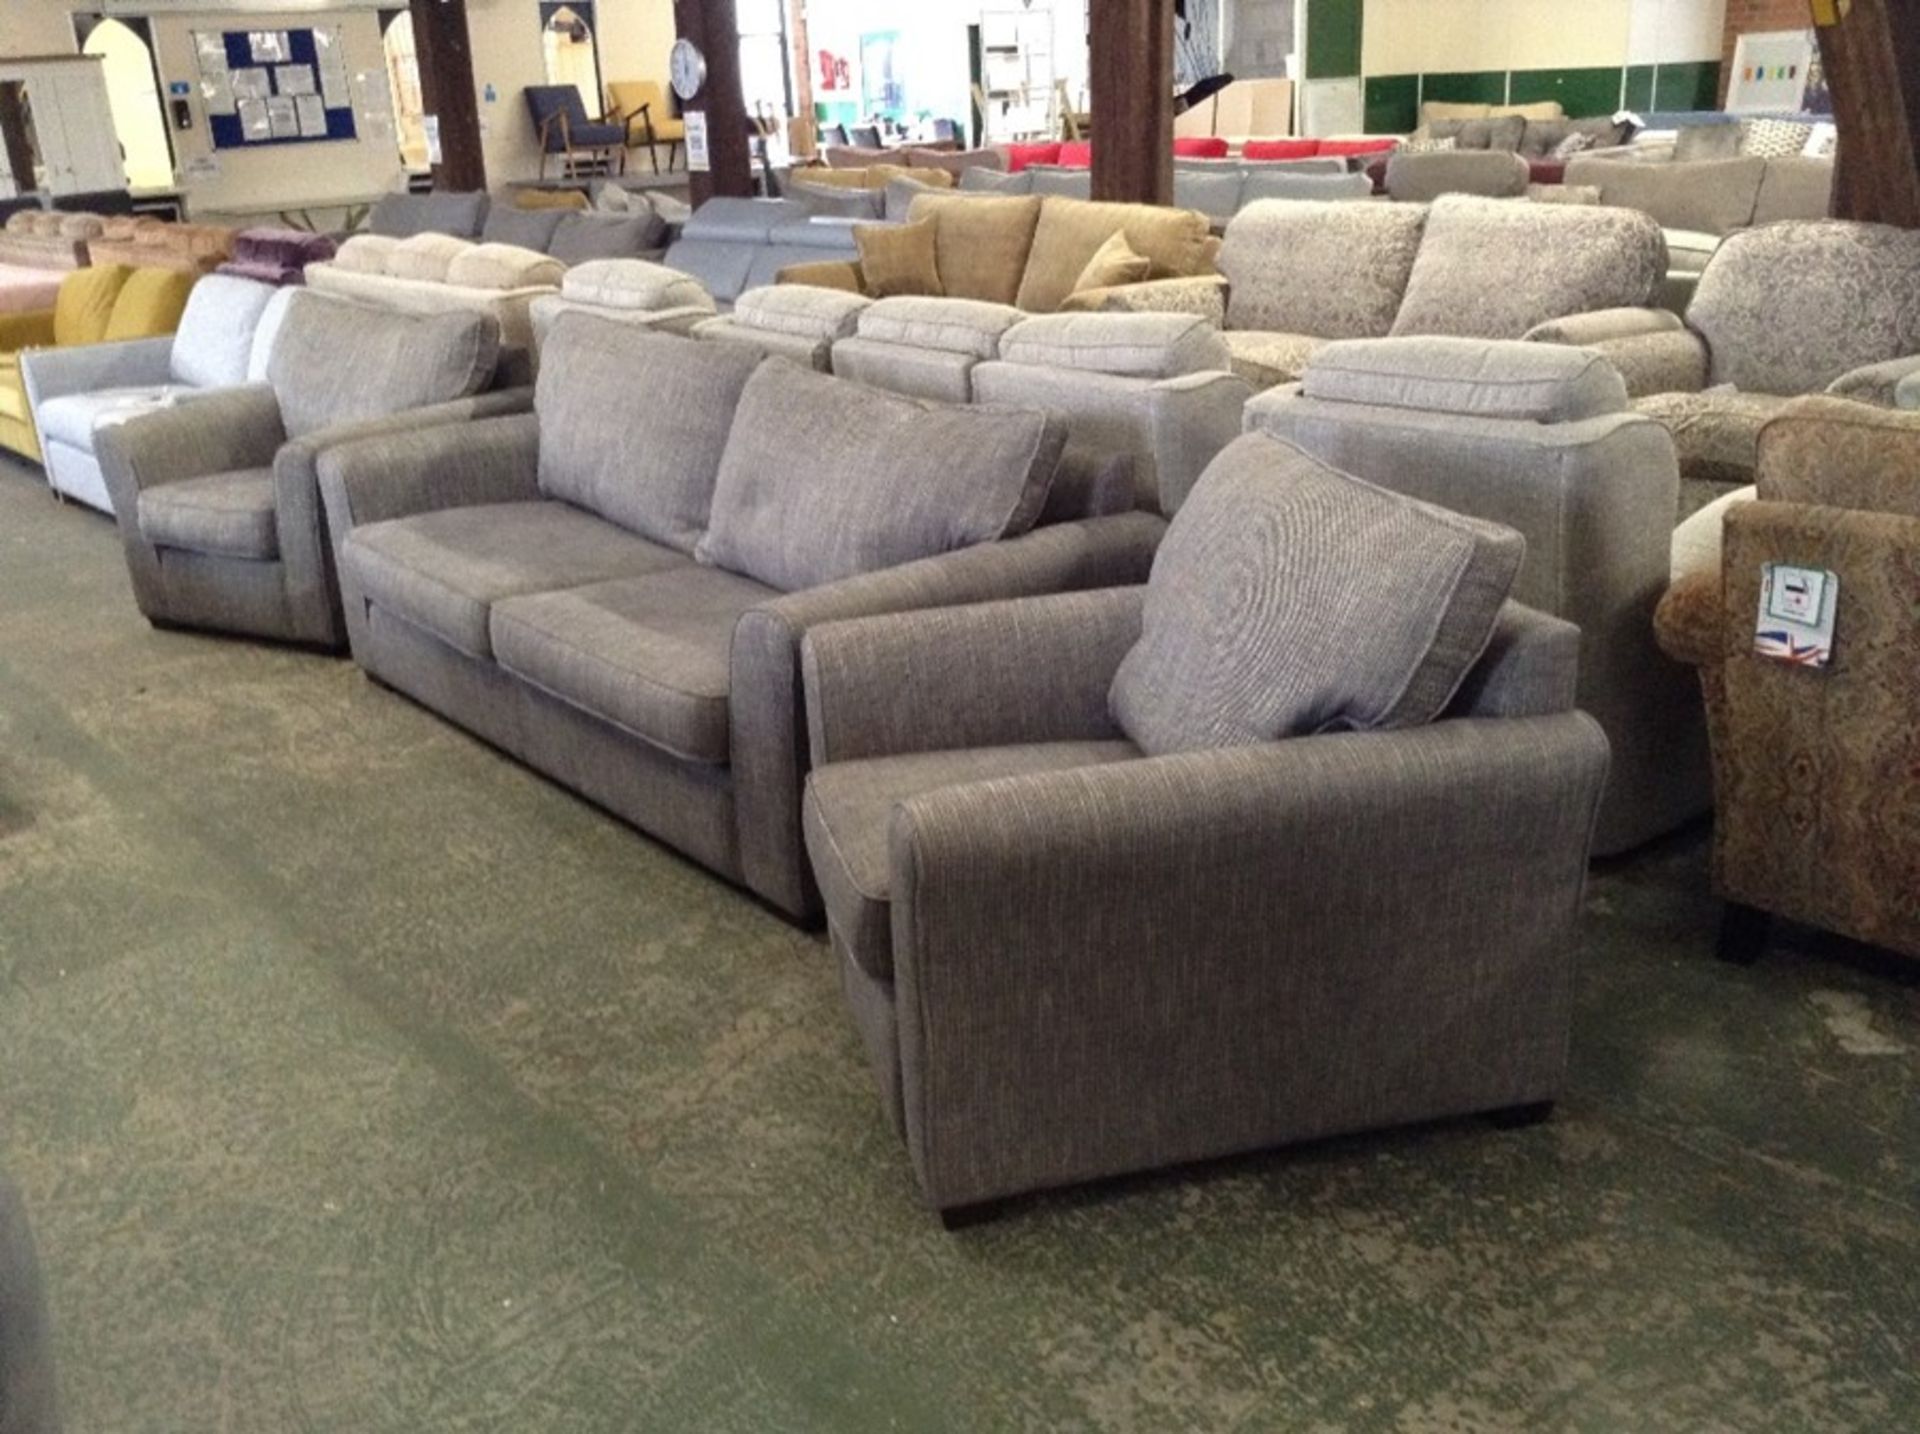 GREY PATTERNED 3 SEATER SOFA AND 2 X CHAIRS (TROO1